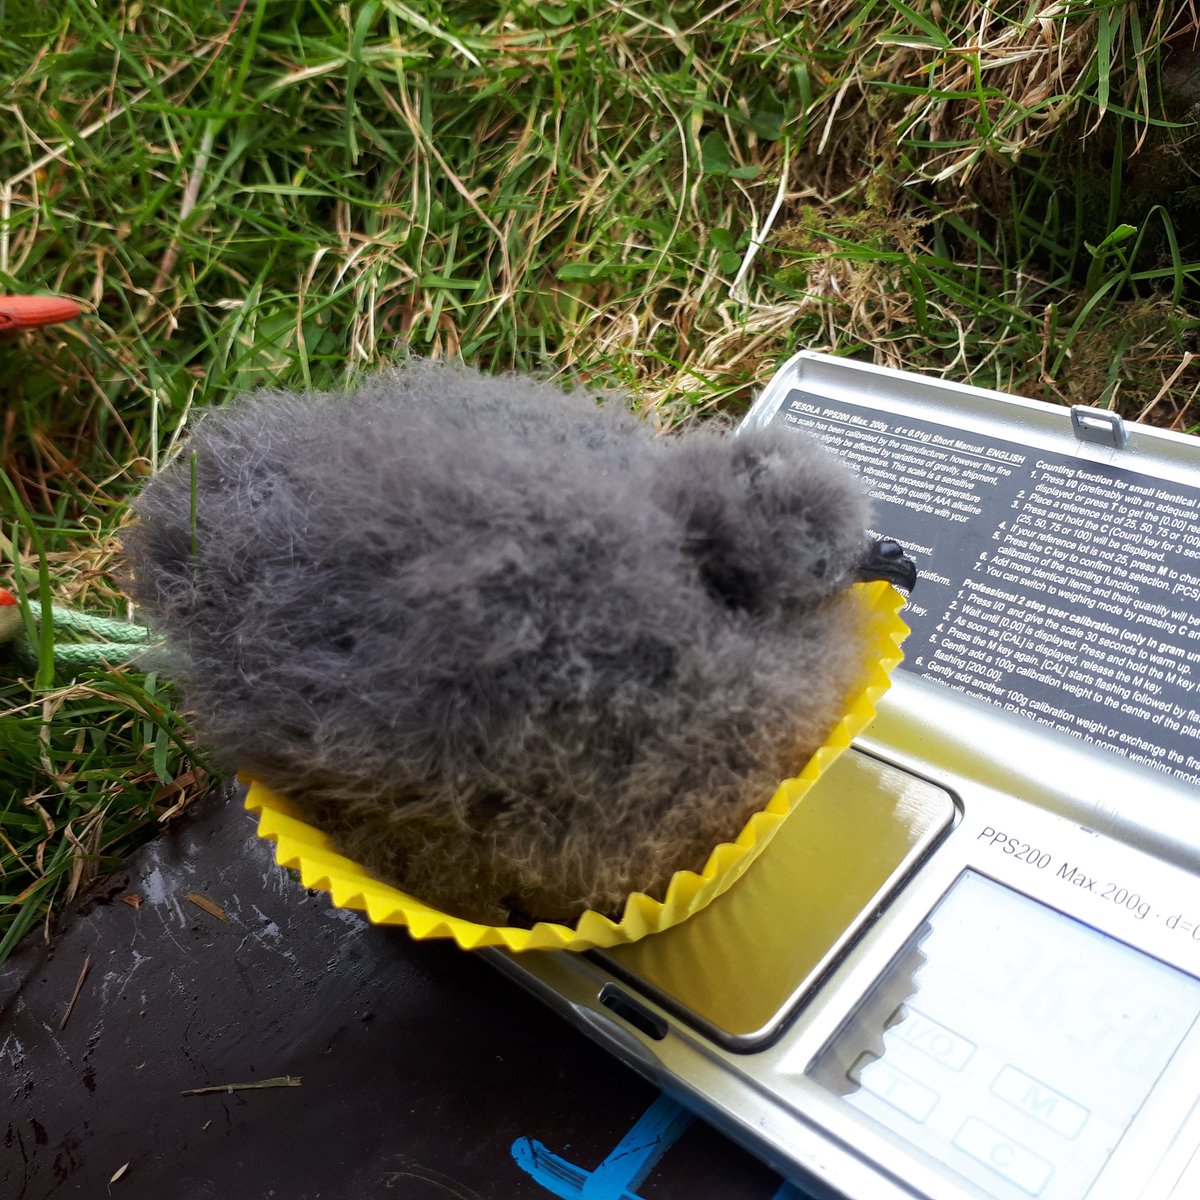 It was a good day for our #stormpetrel #cupcake chicks here on the #FaroeIslands!